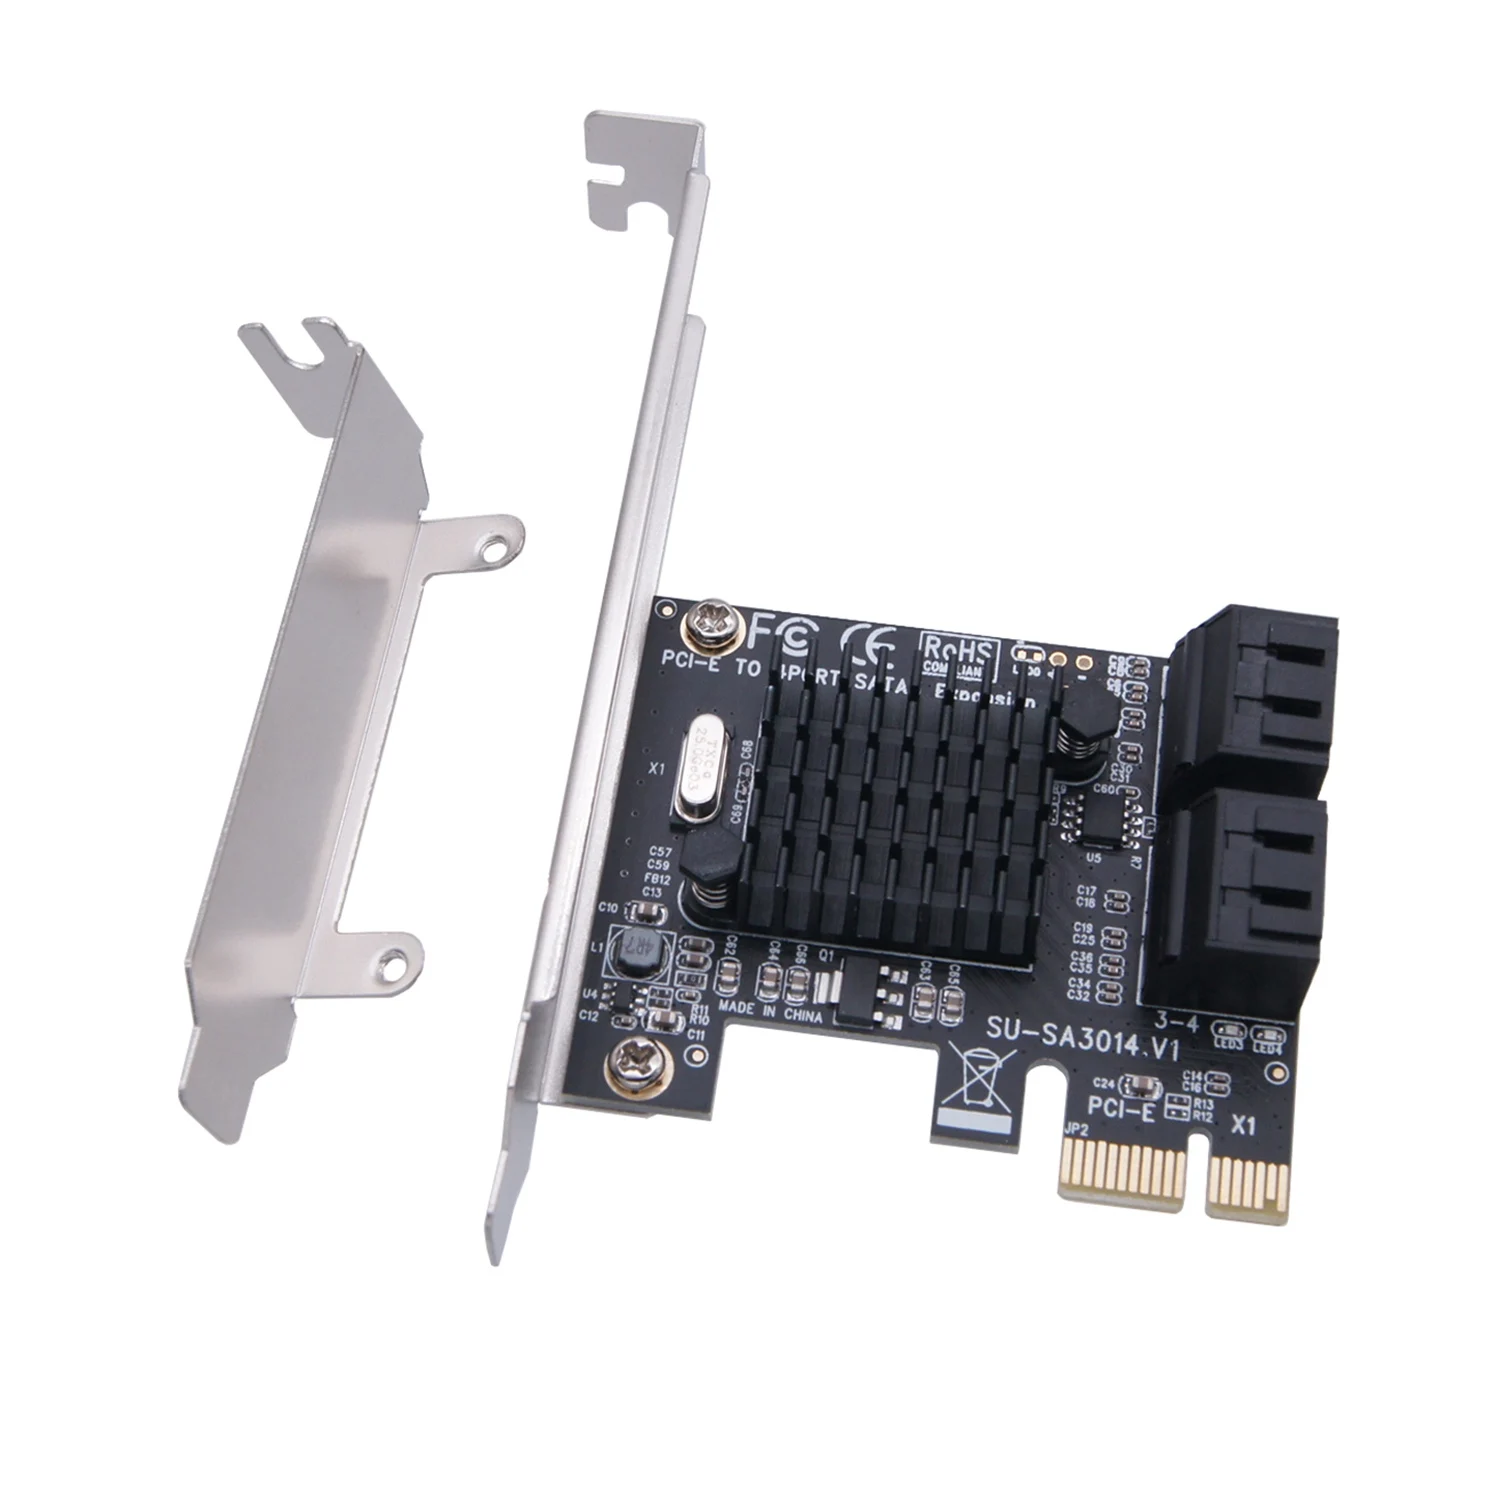 

SATAIII Extender 4-Port Expansion Card 6Gbps PCI-E 1X to SATA3.0 IPFS Hard Drive Riser Card for Window MAC Linux